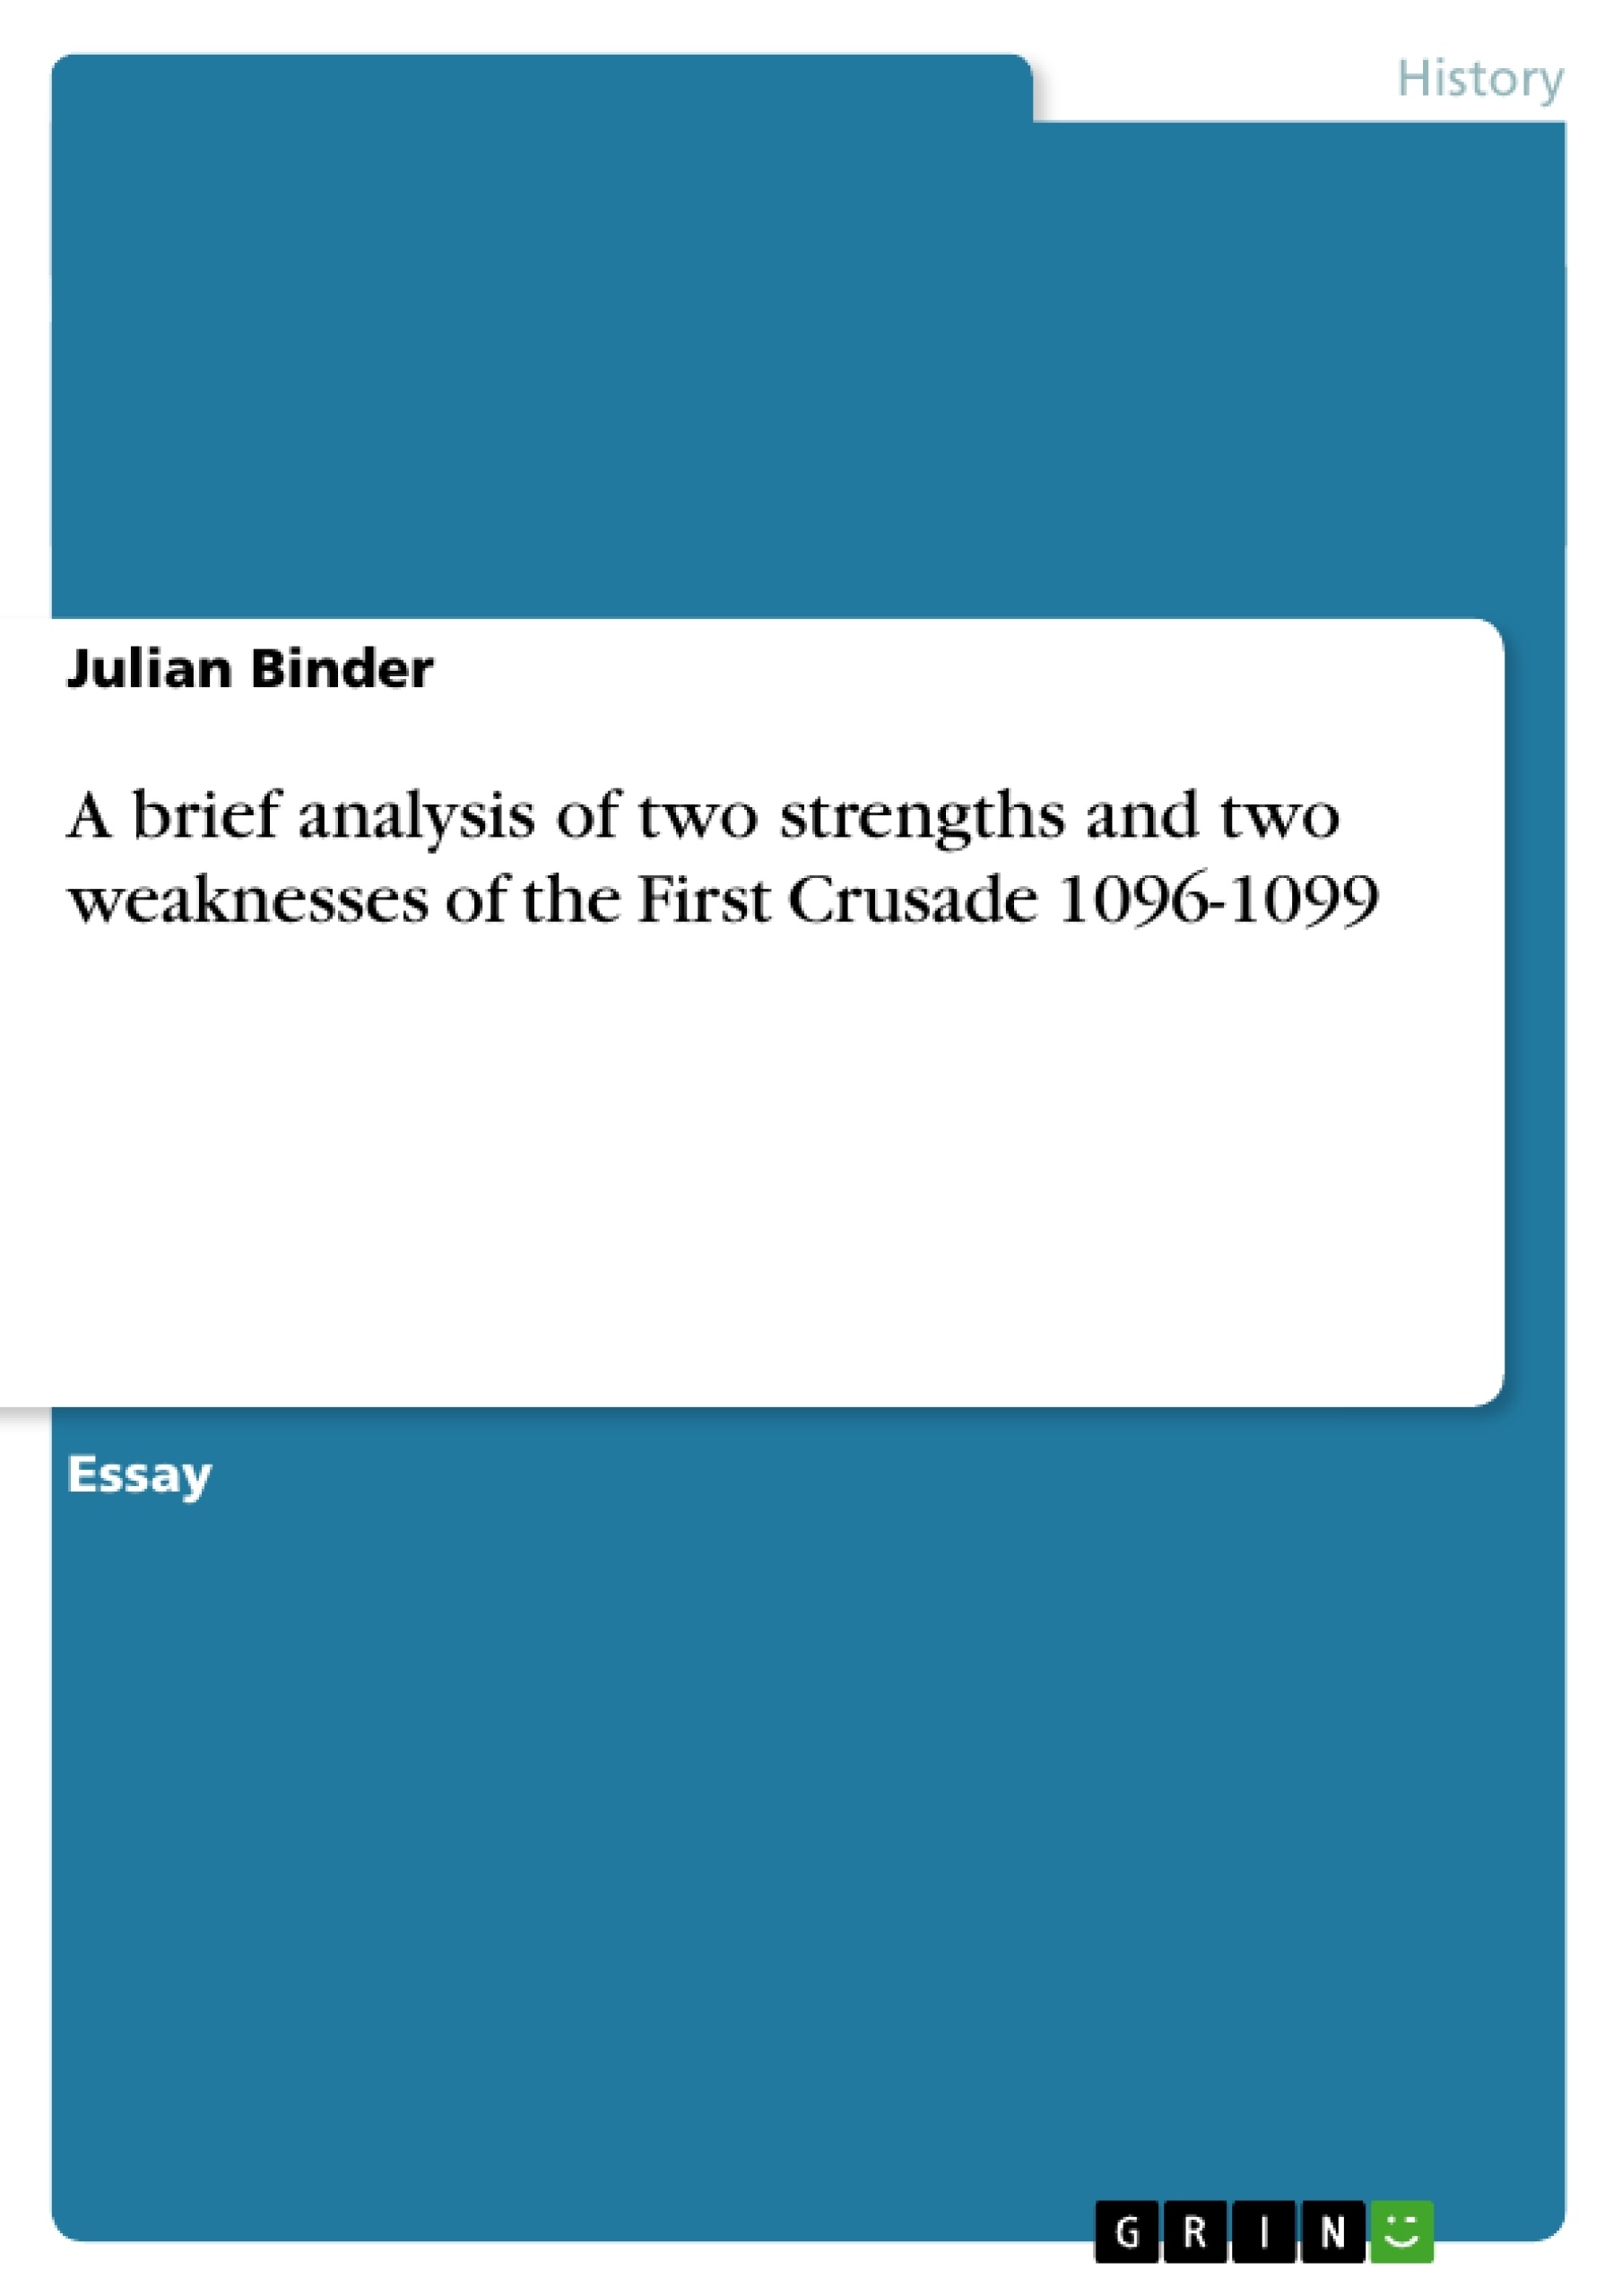 Titel: A brief analysis of two strengths and two weaknesses of the First Crusade 1096-1099